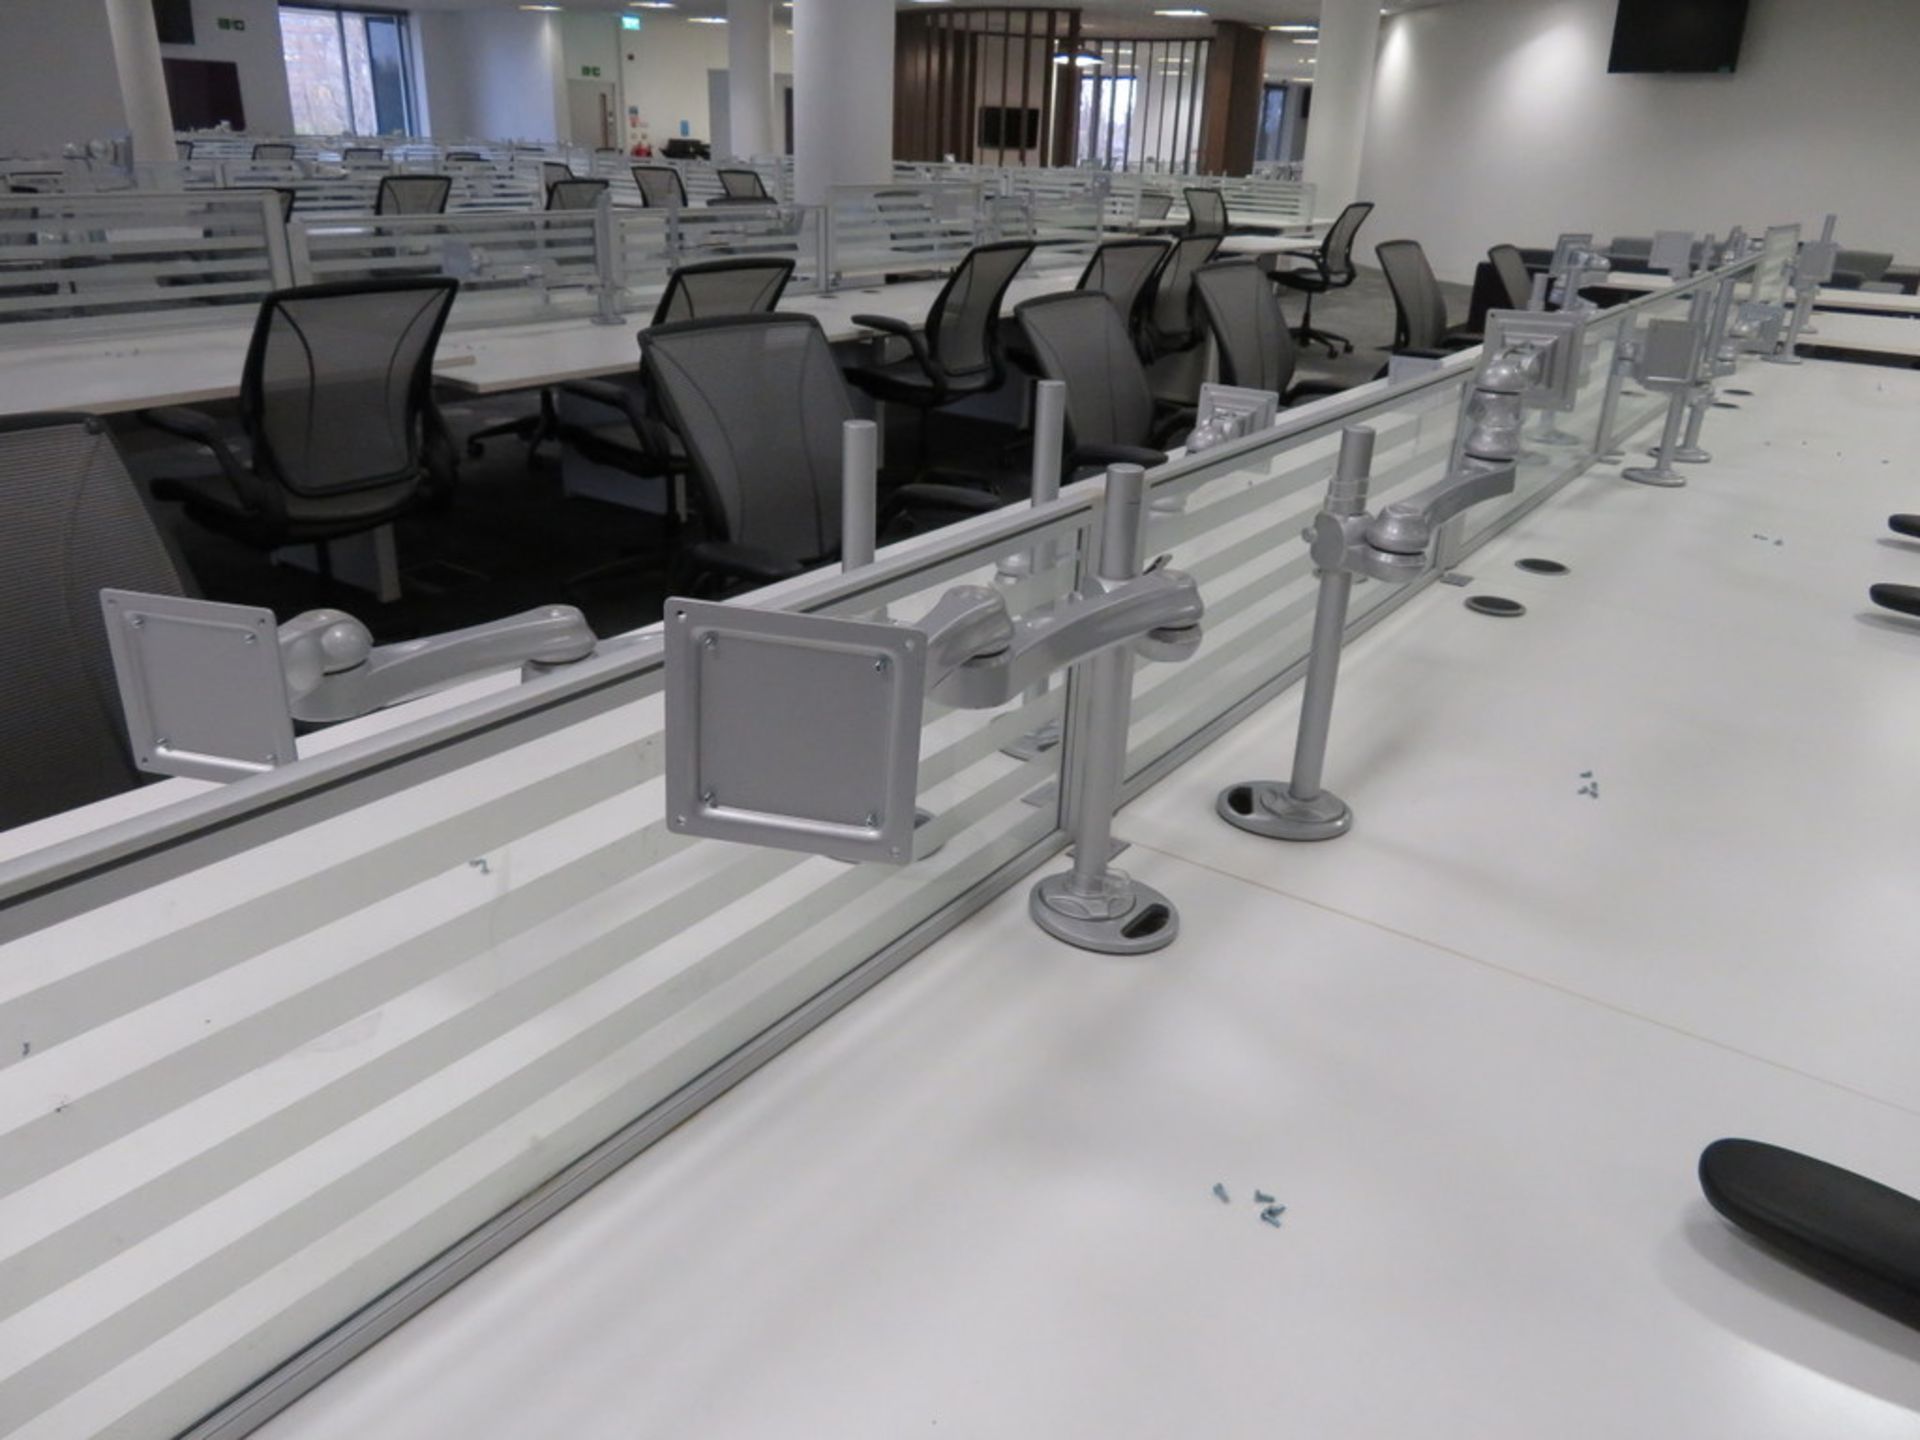 12 Person Desk Arrangement With Dividers & Monitor Arms. Please Note The Chairs Are Not Included. - Image 3 of 3